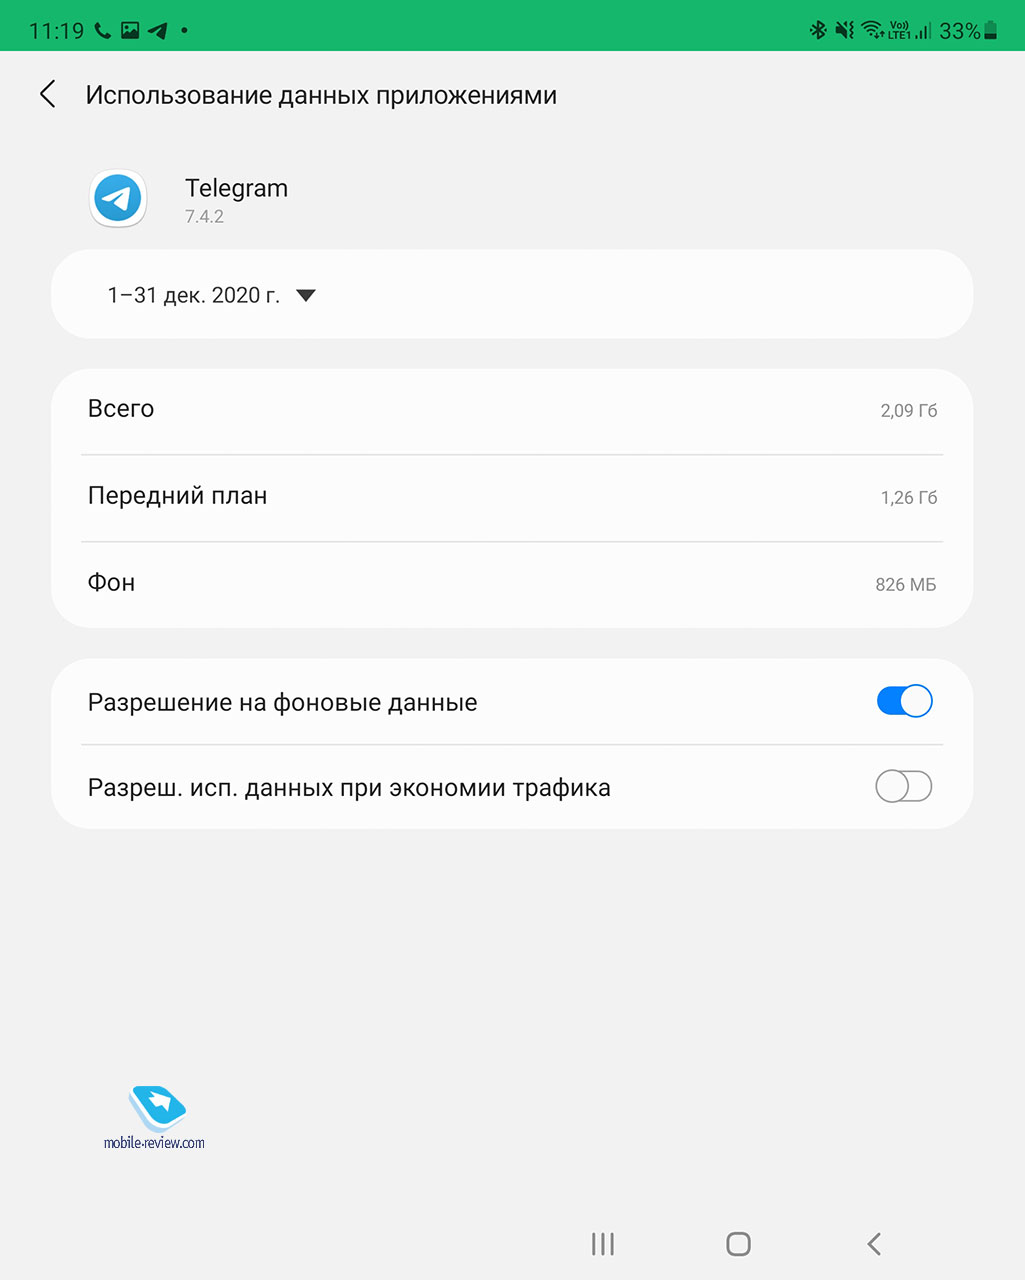 Cost of Telegram content as a service. Messenger economy